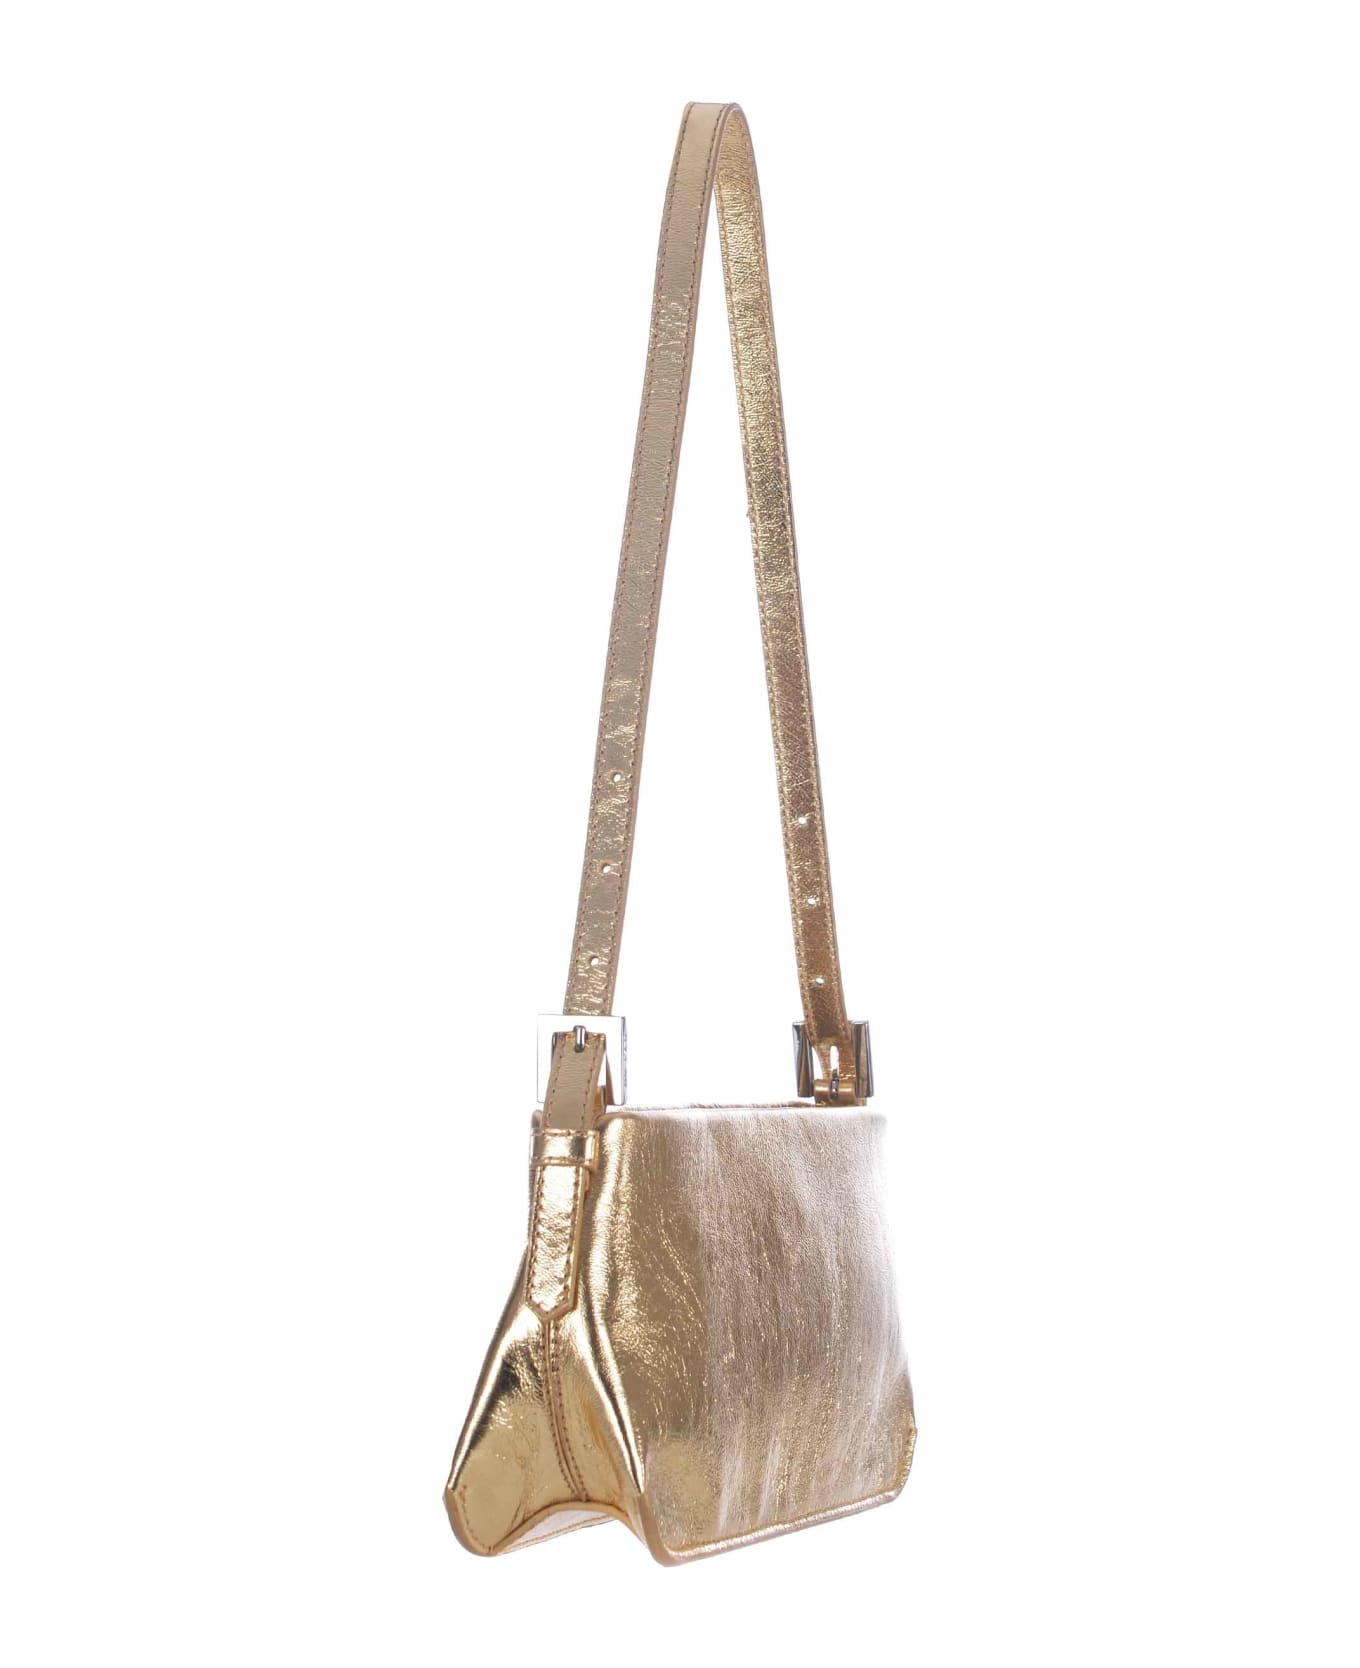 BY FAR Shoulder Bag By Far "dulce" In Metallic Leather - Pale gold